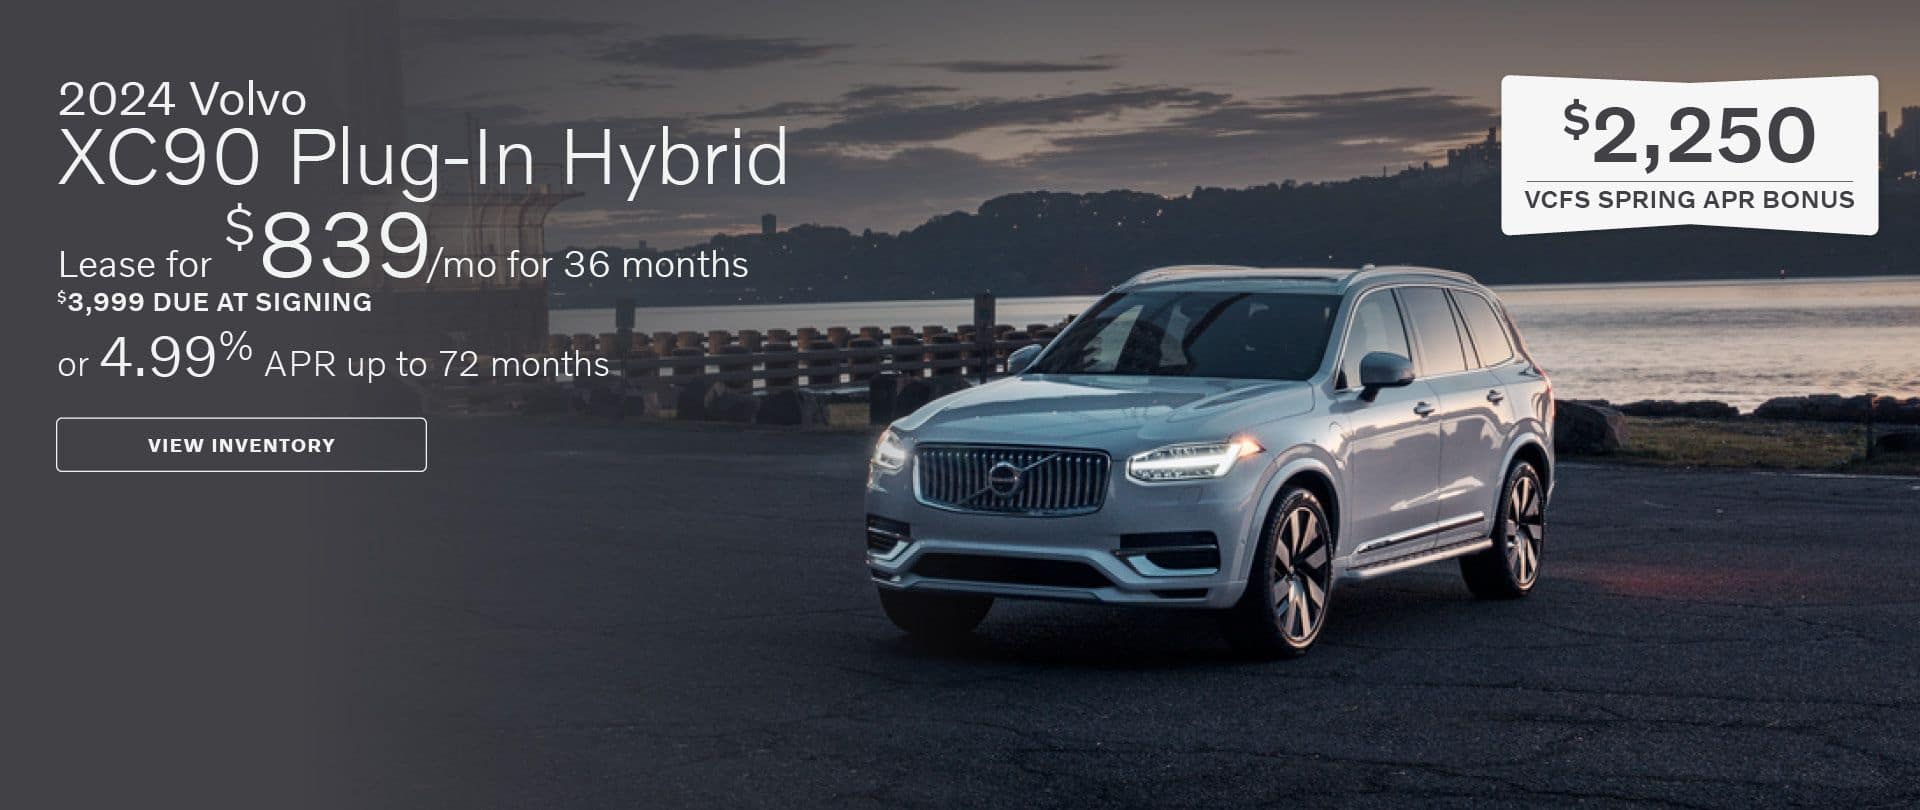 Southern_ROR-Apr24-2024 Volvo XC90 Plug-In Hybrid | Lease for $839:mo_1920x810